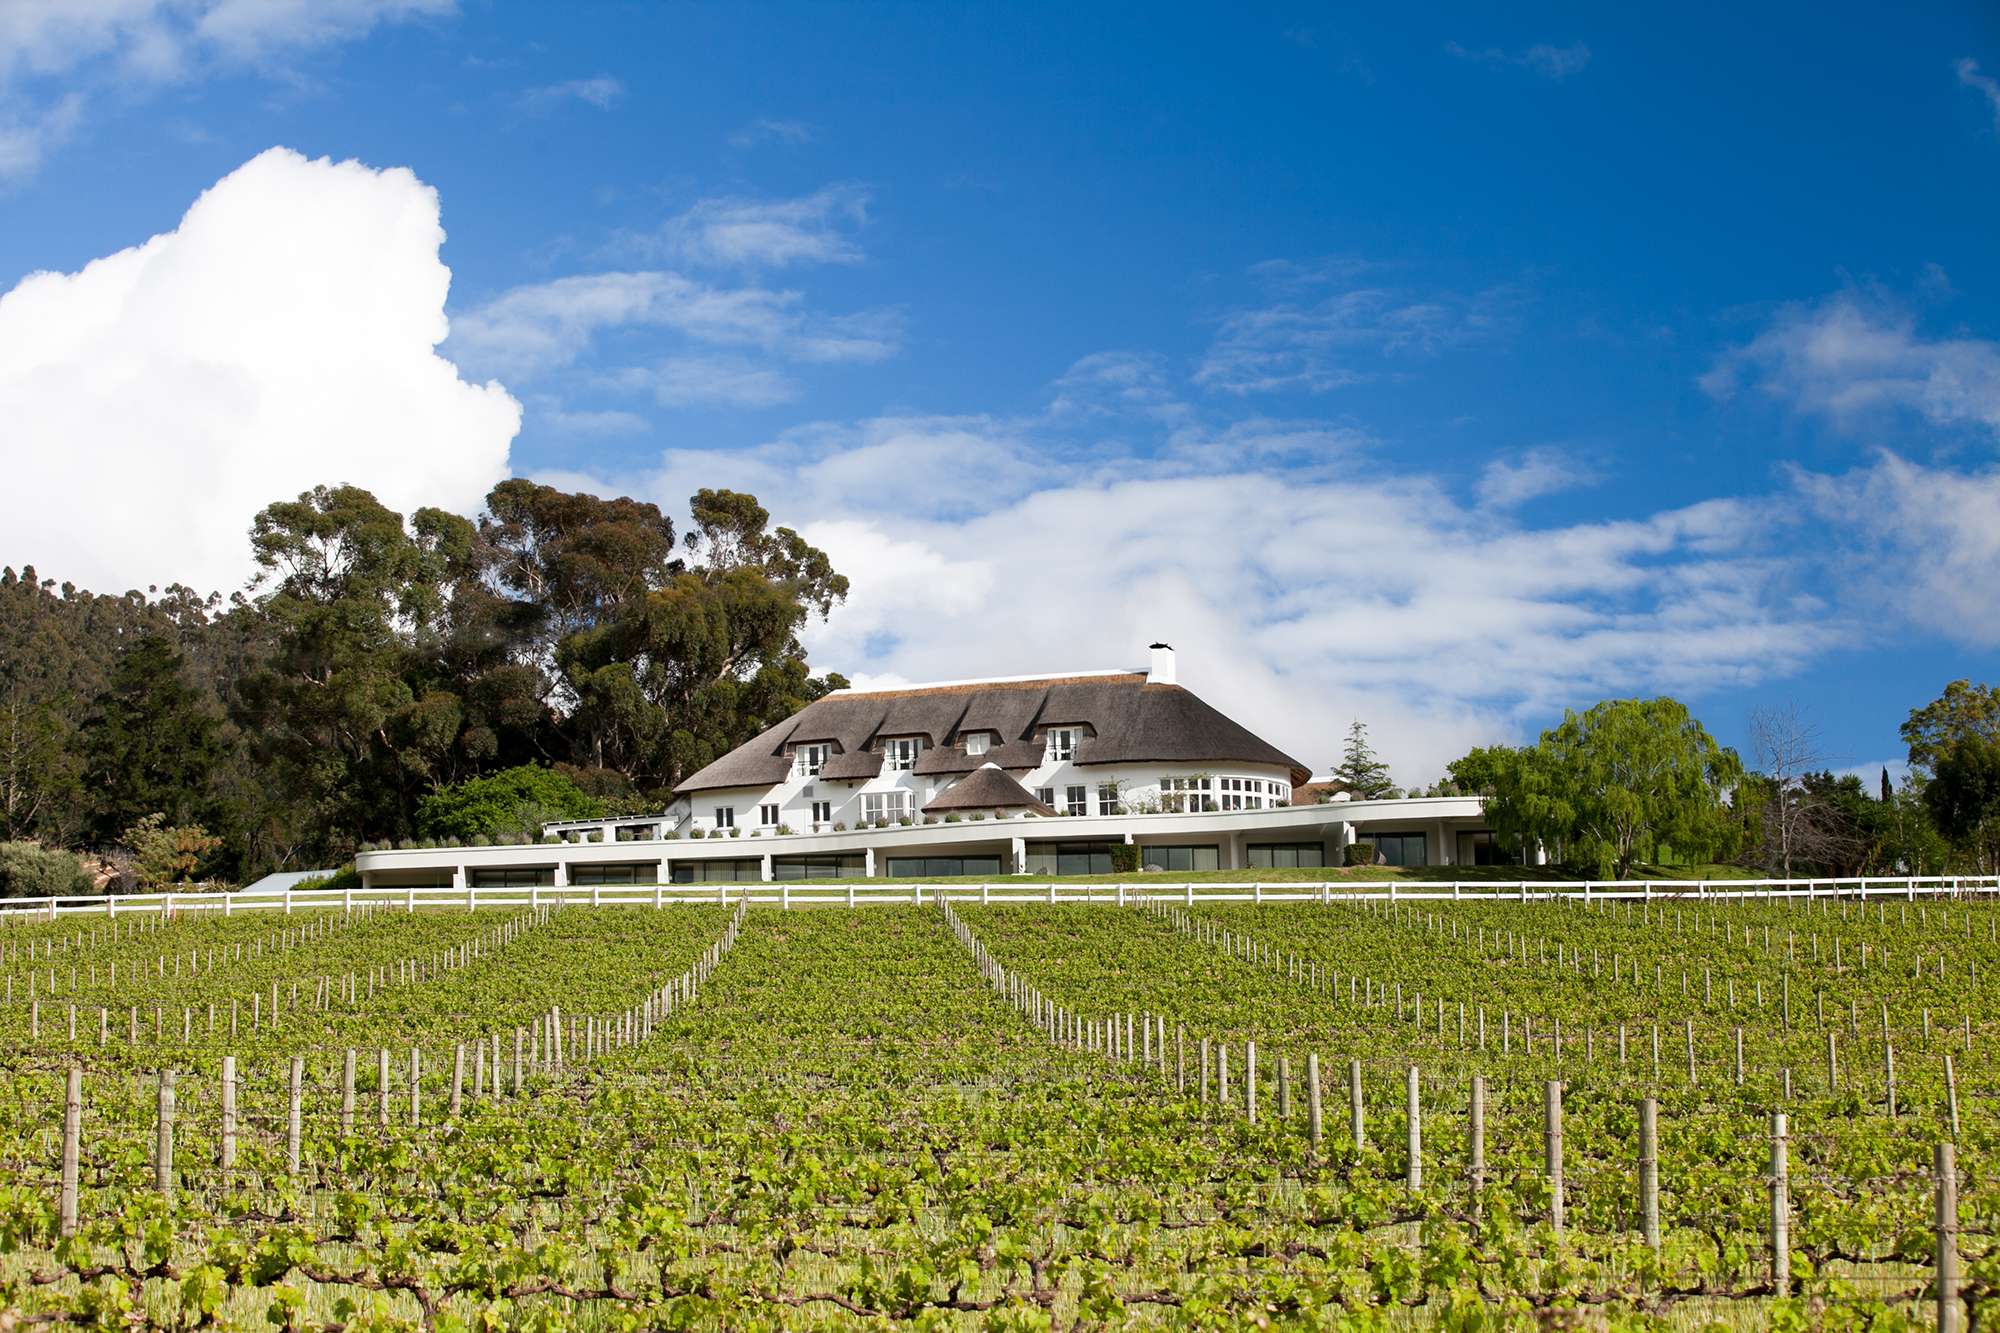 Beyond wine, the Franschhoek property is set in a foodie heartland with plenty of fun family attractions